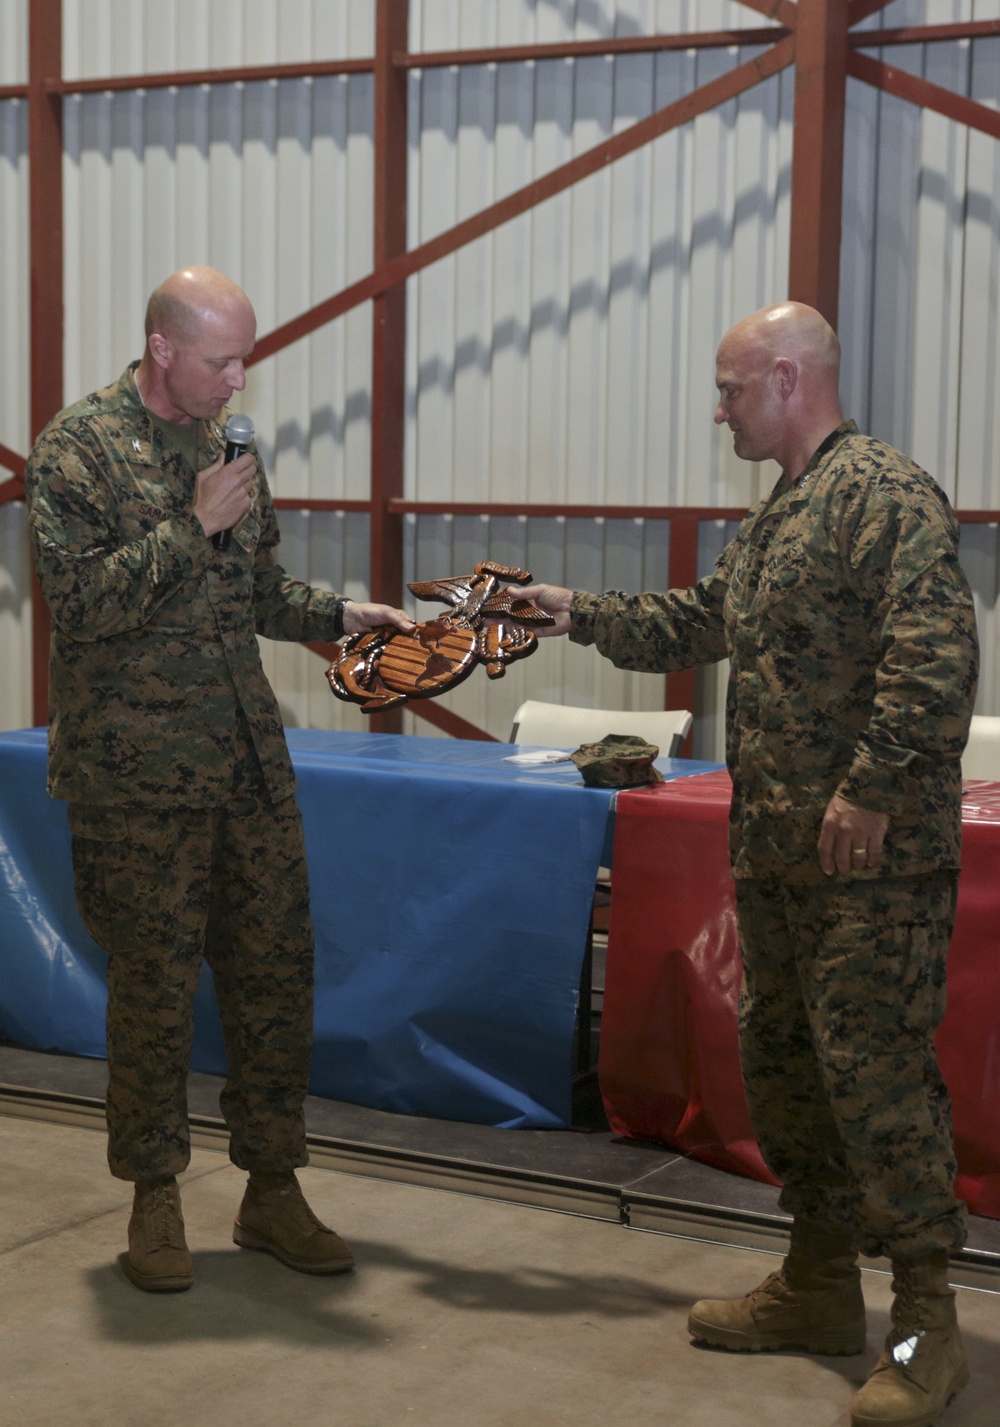 Keeping Marine Corps traditions while deployed